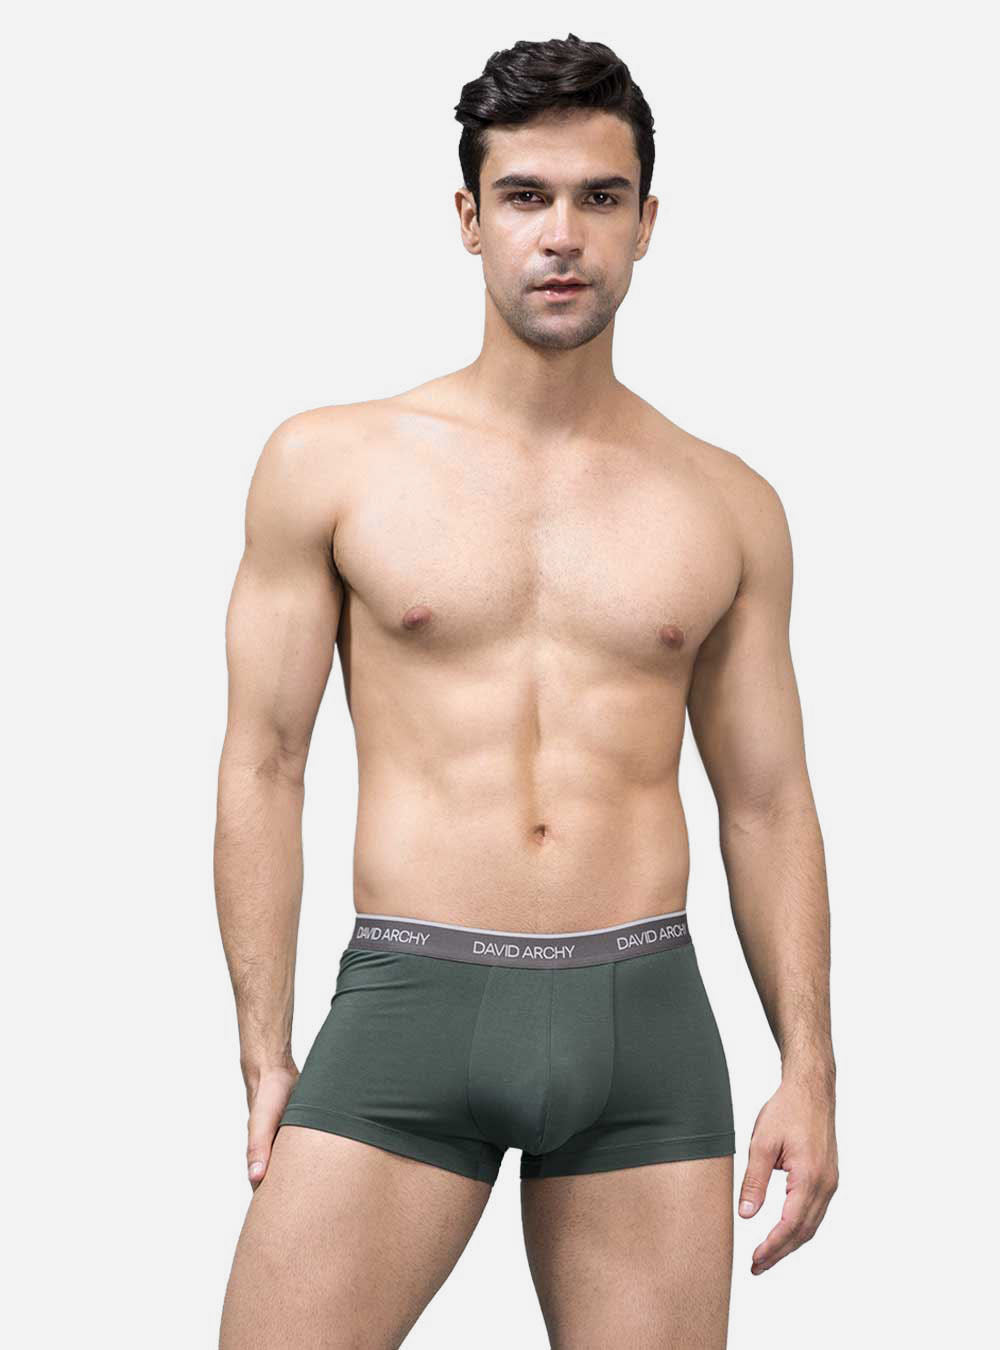 DAVID ARCHY Men's Dual Pouch Underwear - These are REALLY